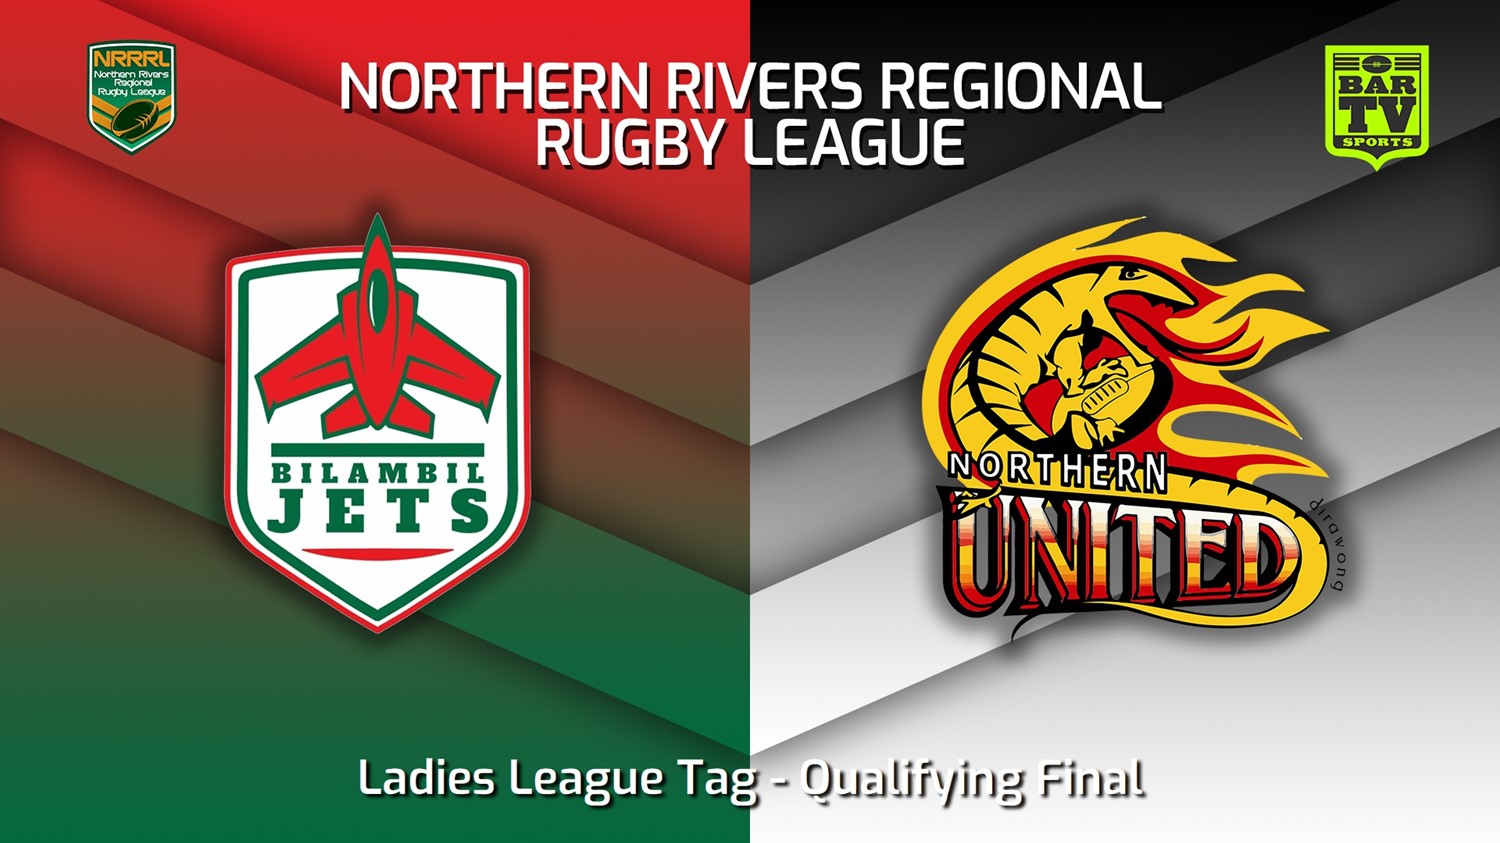 220814-Northern Rivers Qualifying Final - Ladies League Tag - Bilambil Jets v Northern United Slate Image